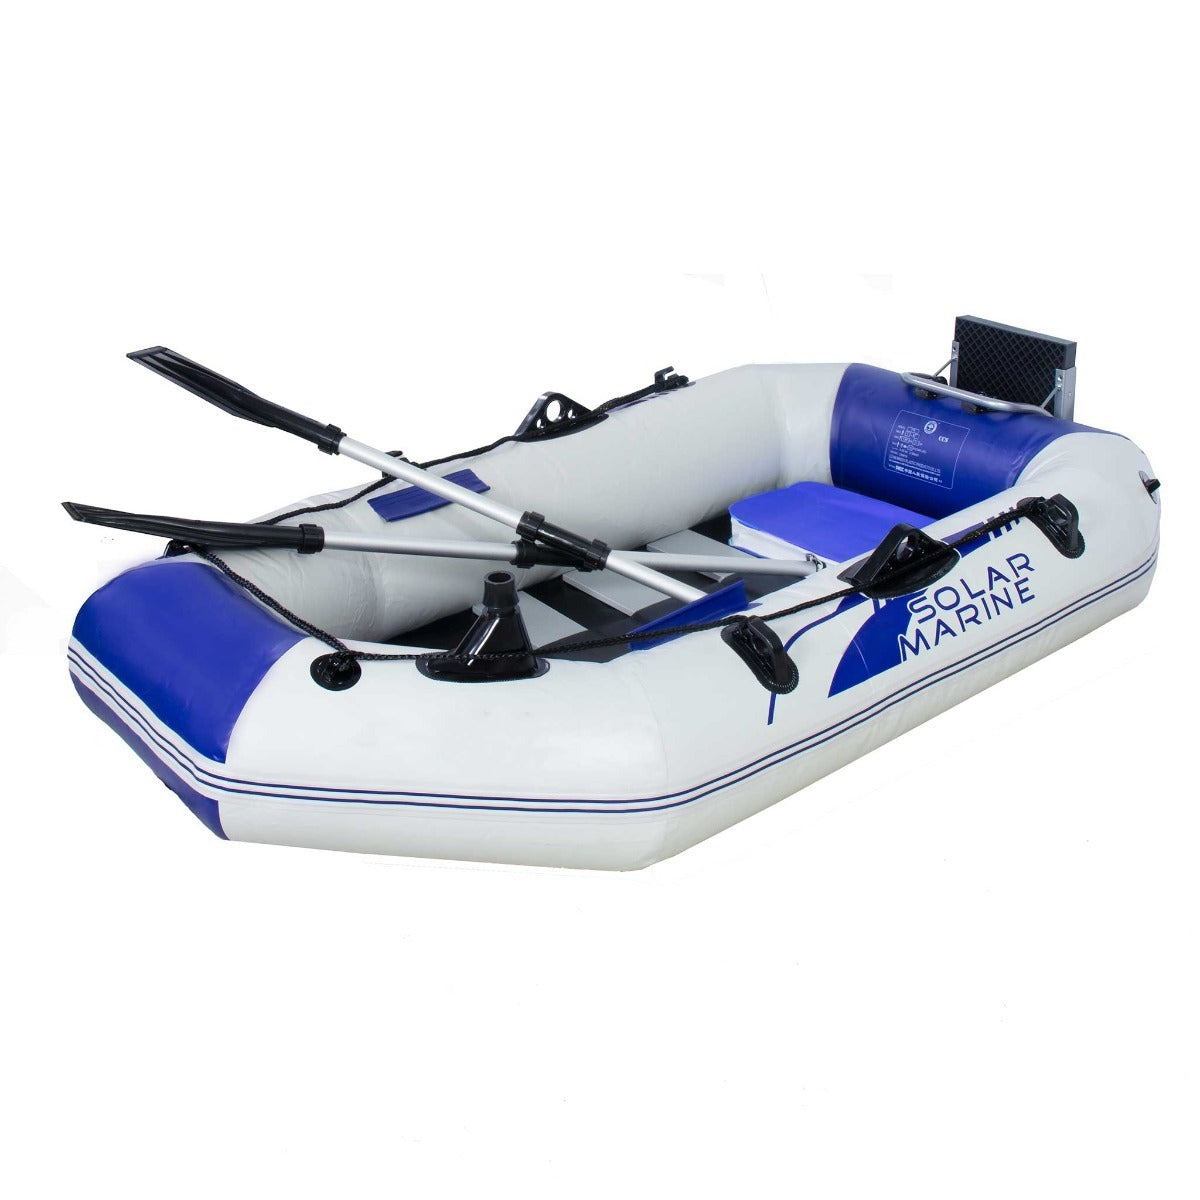 Solar Marine Inflatable Boat Lake, 1 Person - 199,00 EUR - Nordic